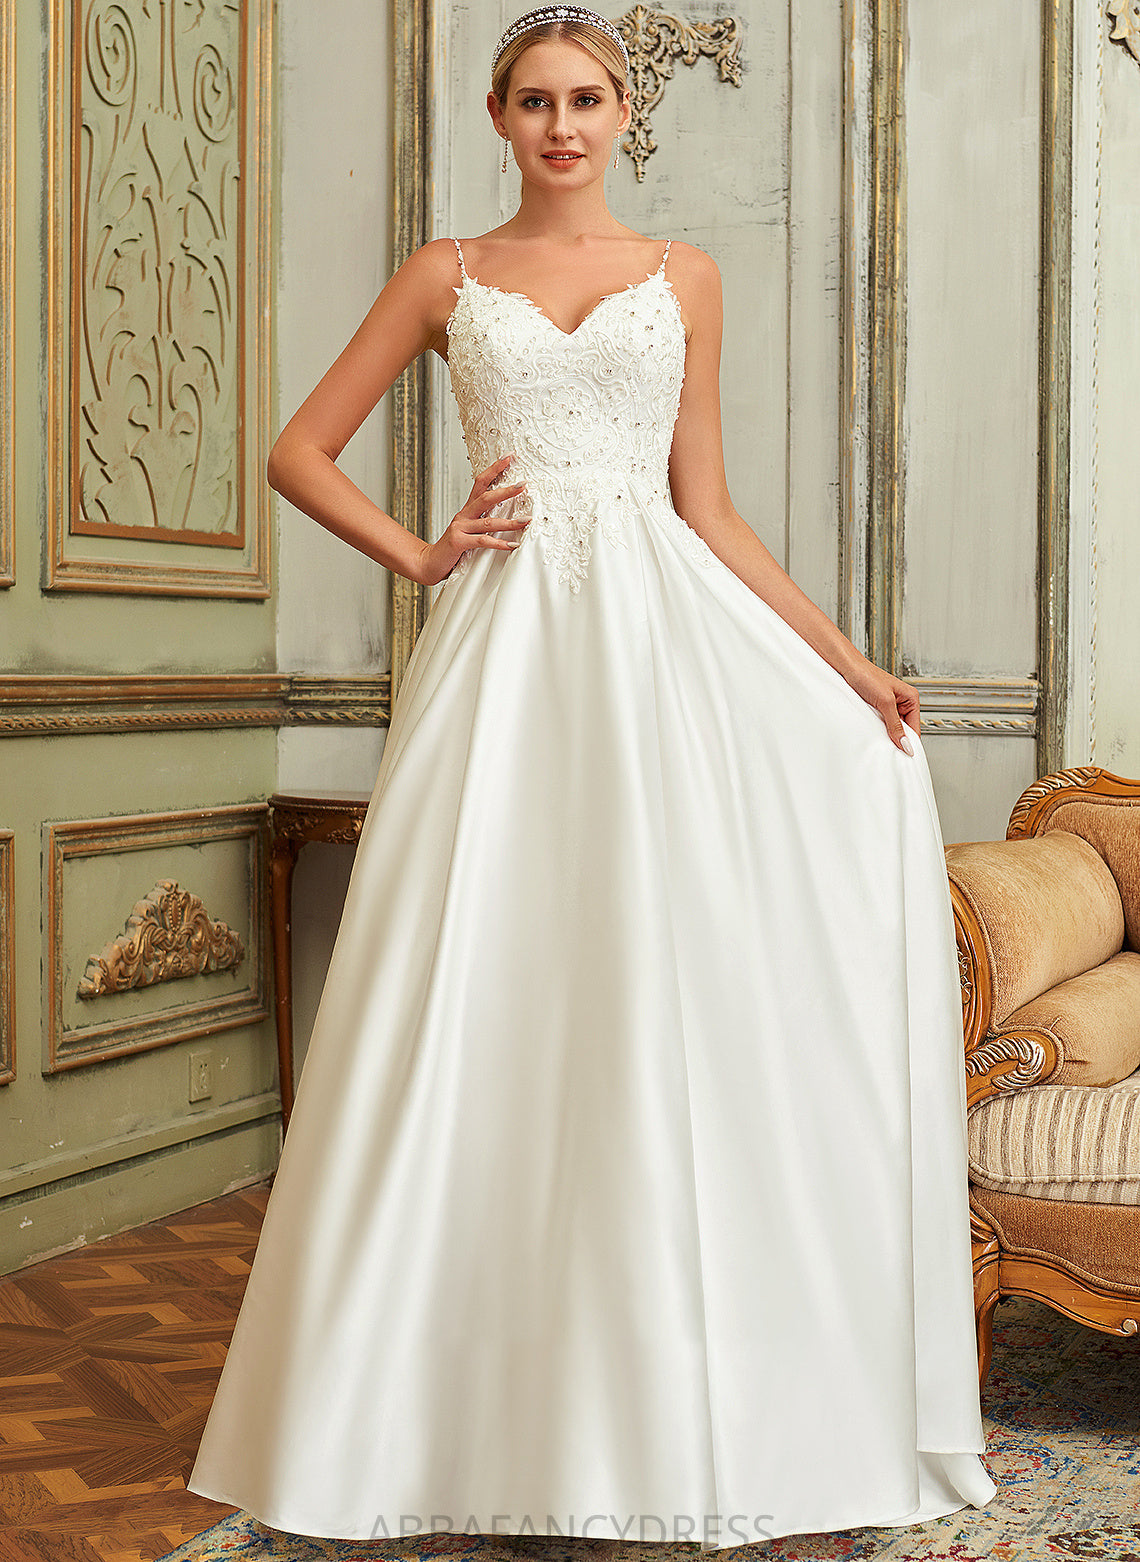 Wedding Dresses Katelynn With Pockets Sweep Lace Lace V-neck Dress Beading Train Satin Sequins Ball-Gown/Princess Wedding